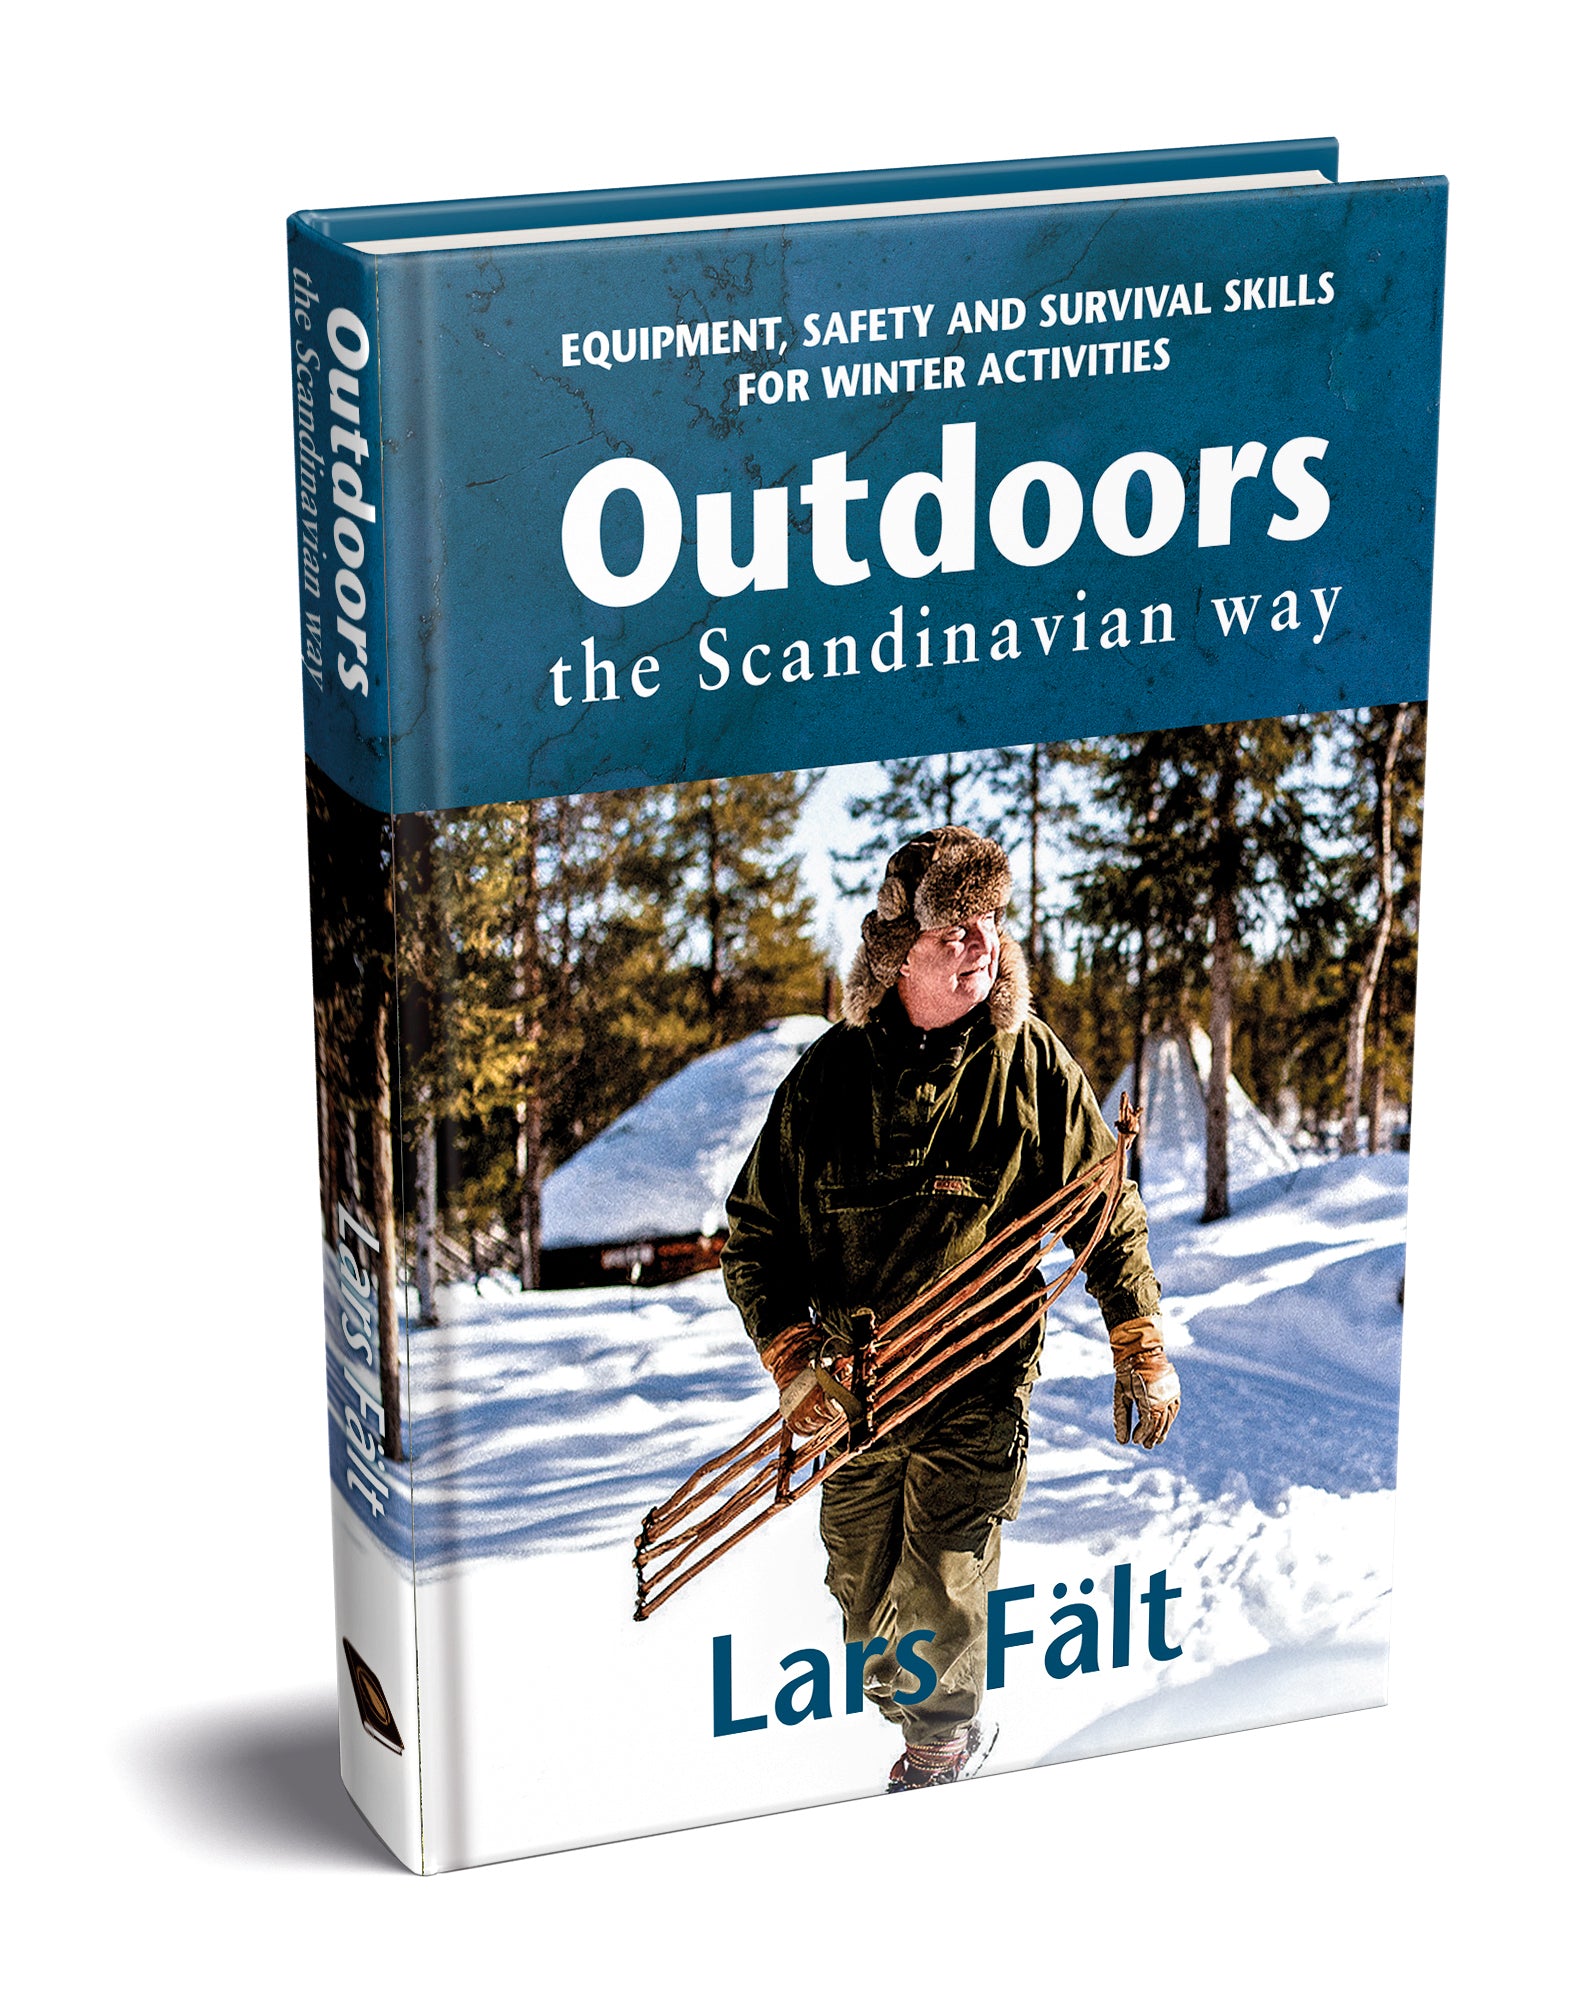 Front cover of "Outdoors the Scandinavian Way" Winter skills by Lars Fält